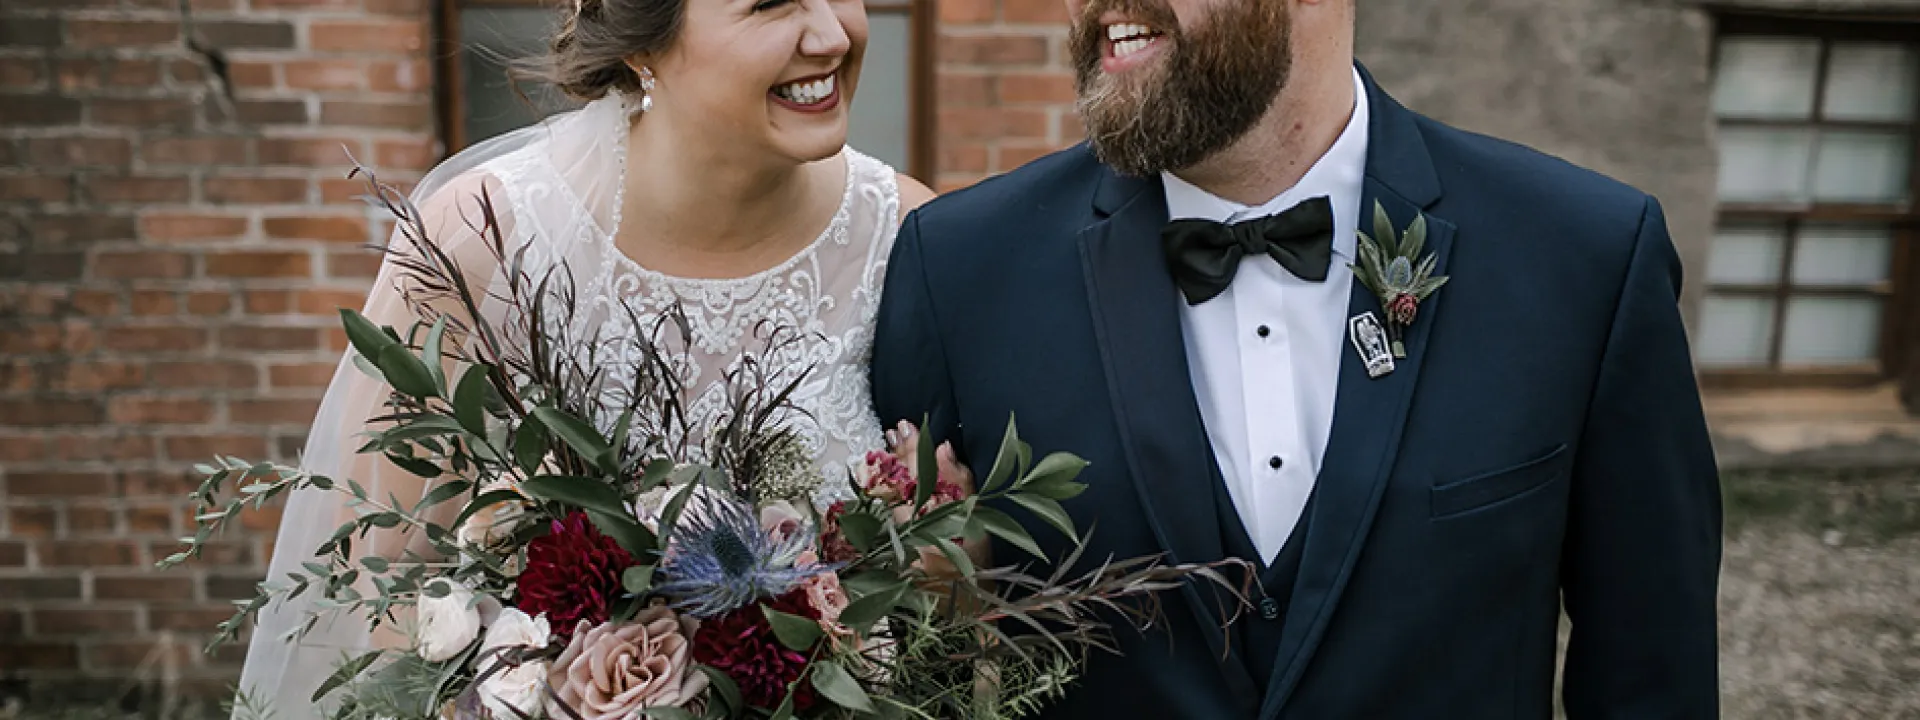 Kate and Matt's vintage wedding at The Capitol Room